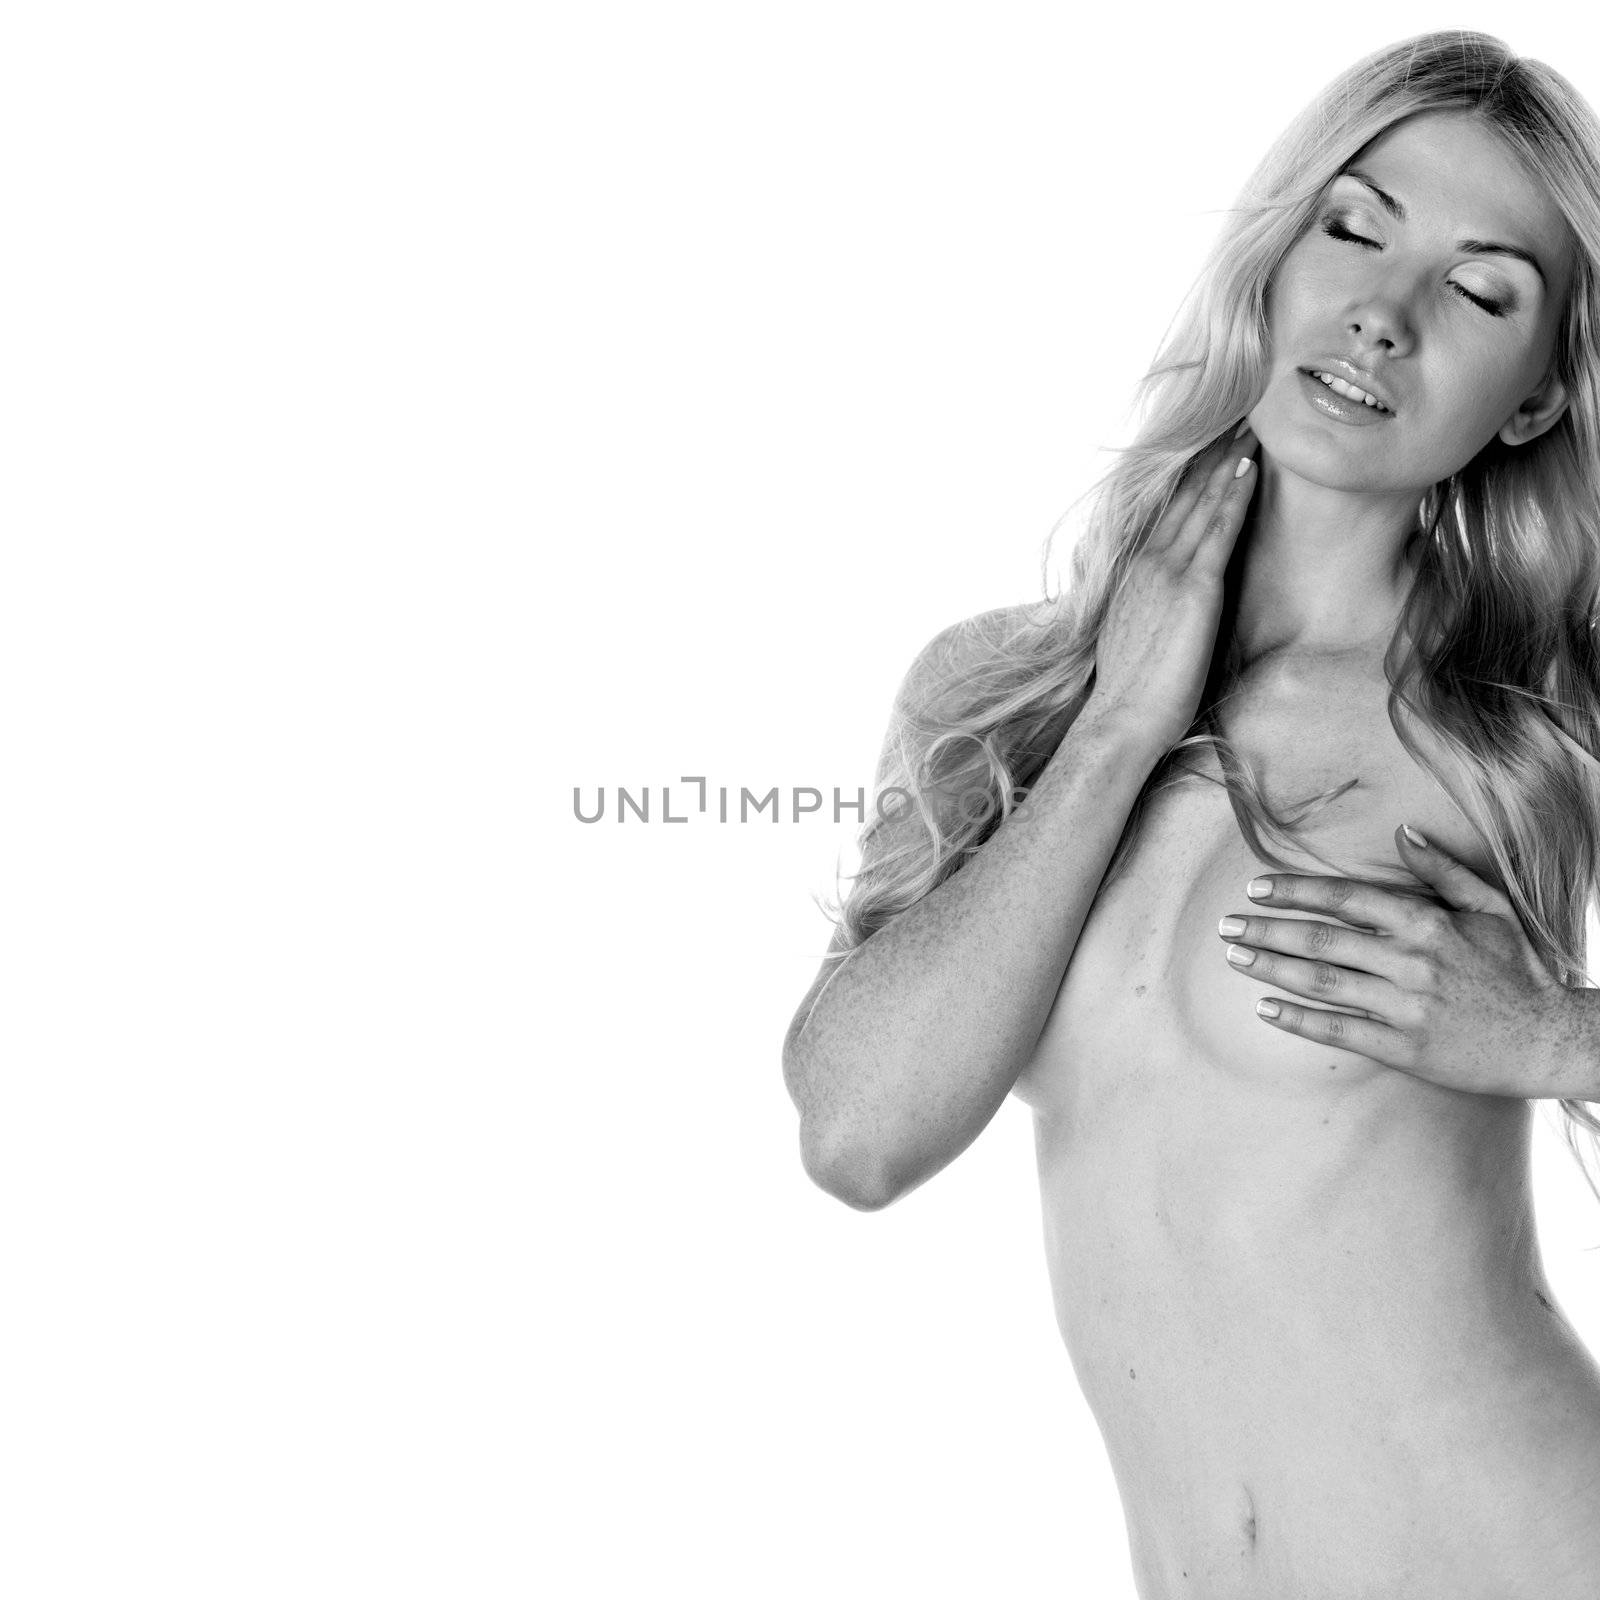 nude woman isolated on white BW portrait